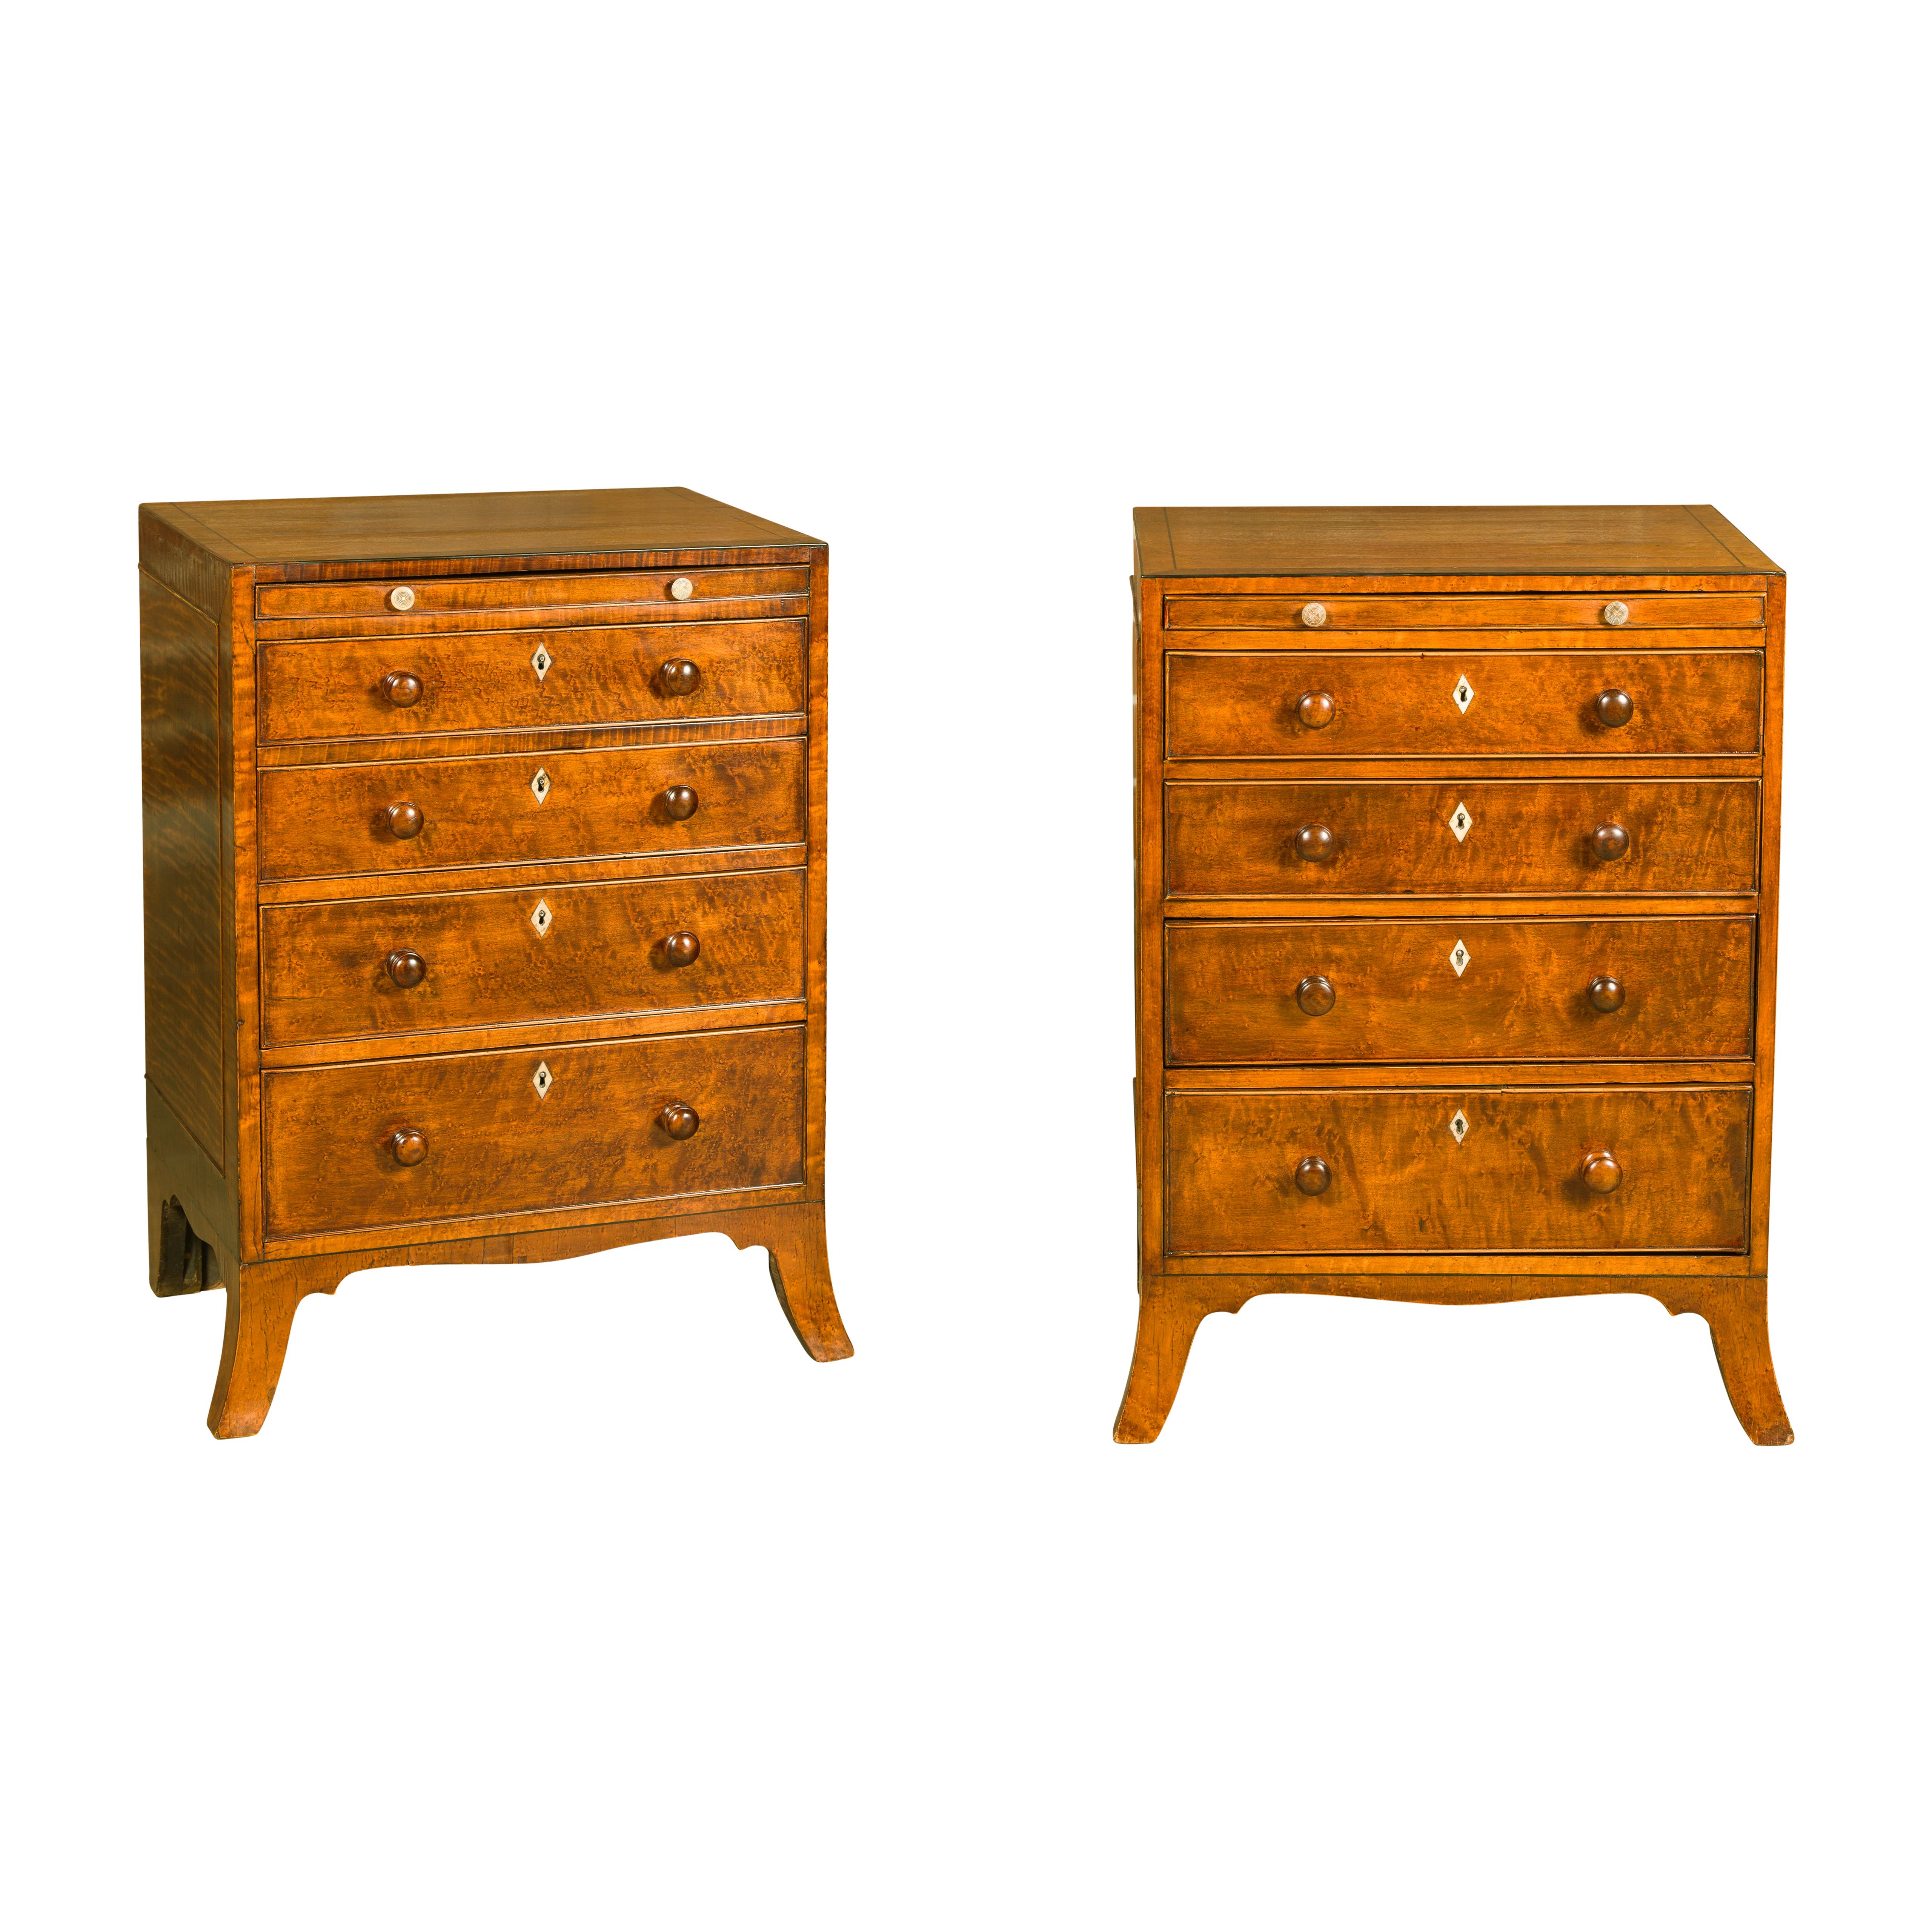 English Regency Period 1820s Bedside Chests with Graduating Drawers For Sale 13